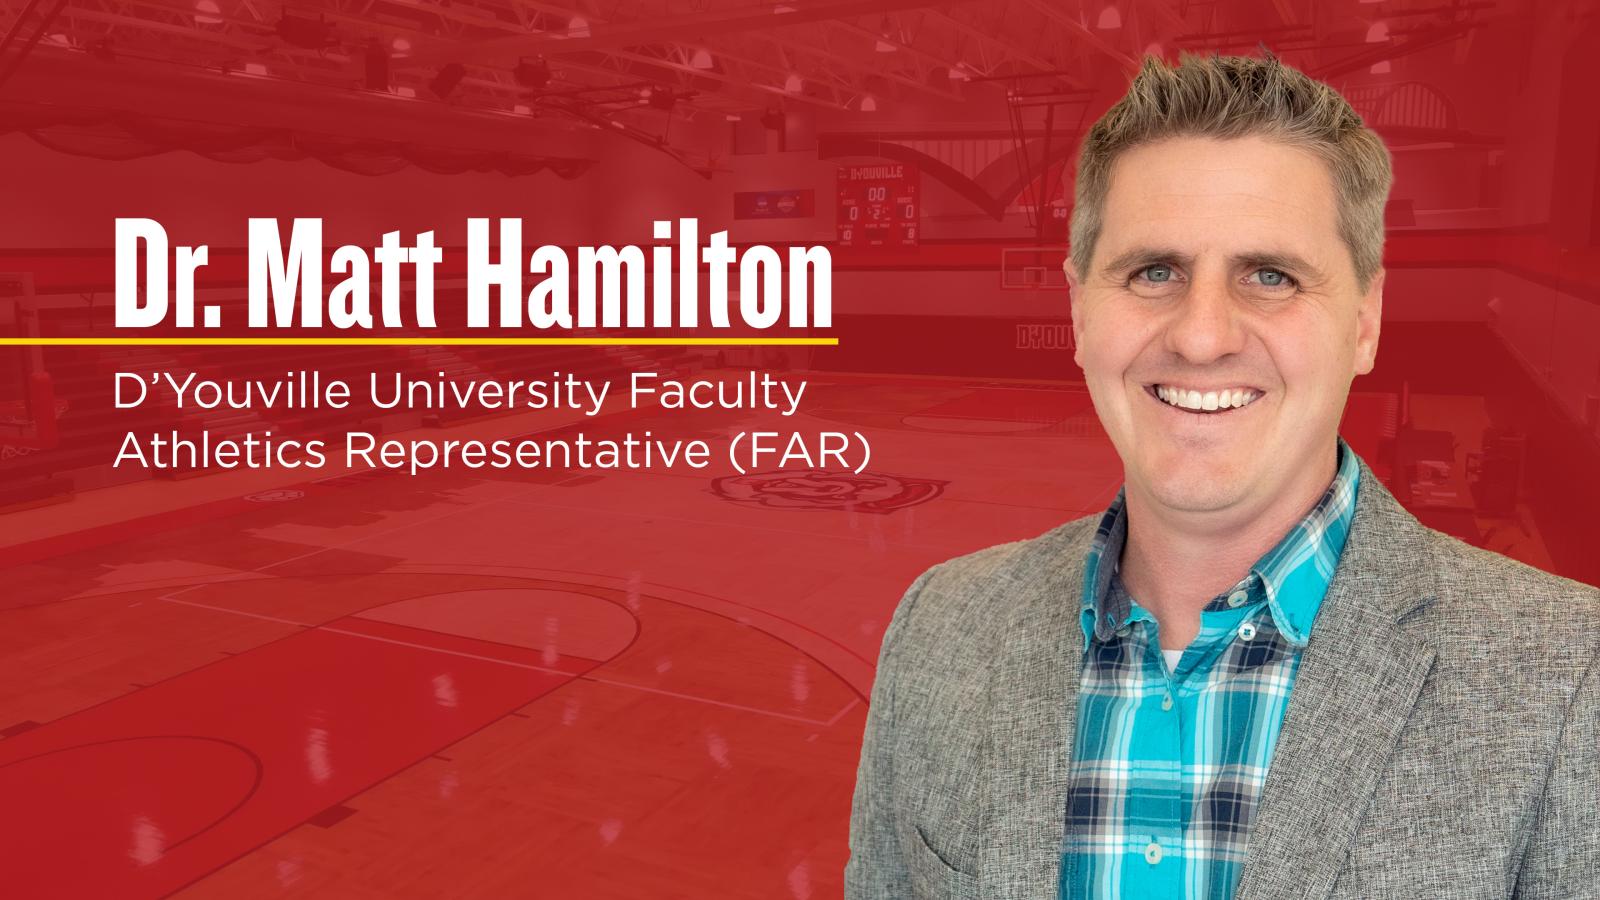 Image of Matt Hamilton smiling for a headshot cut out and placed in front of an image of the College Center Gymnasium colored over in red. Title Graphic on the image reads, Dr. Matt Hamilton, D'Youville University Faculty Athletics Representative (FAR)